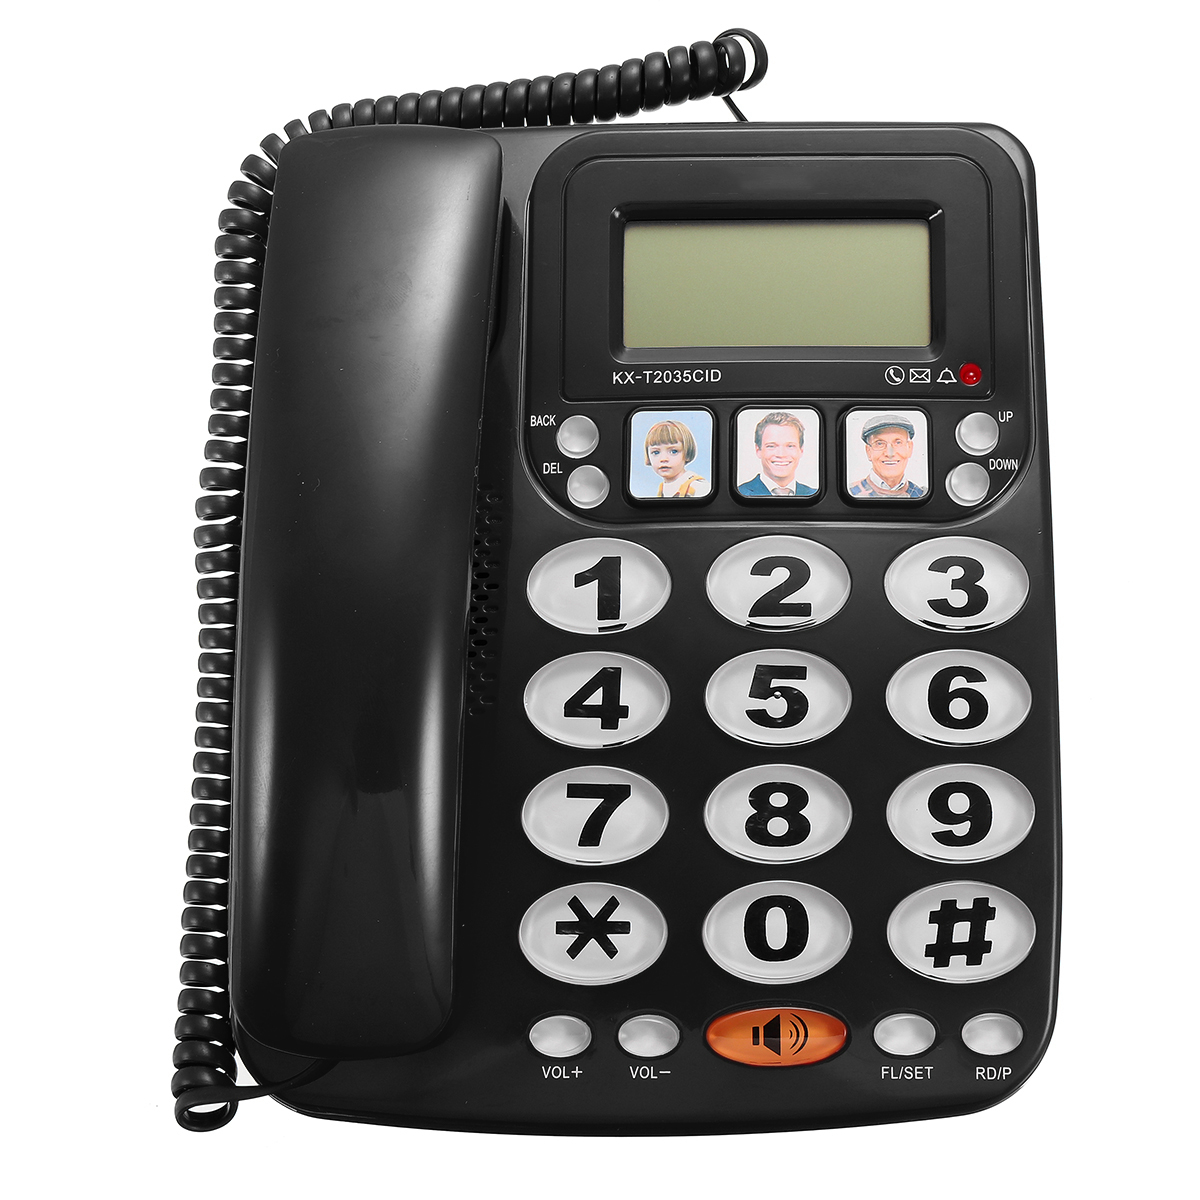 

KX-2035CID 2-line Corded Telephone with Speakerphone Speed Dial Corded Phone Incoming Call Display with Caller ID for Home Office